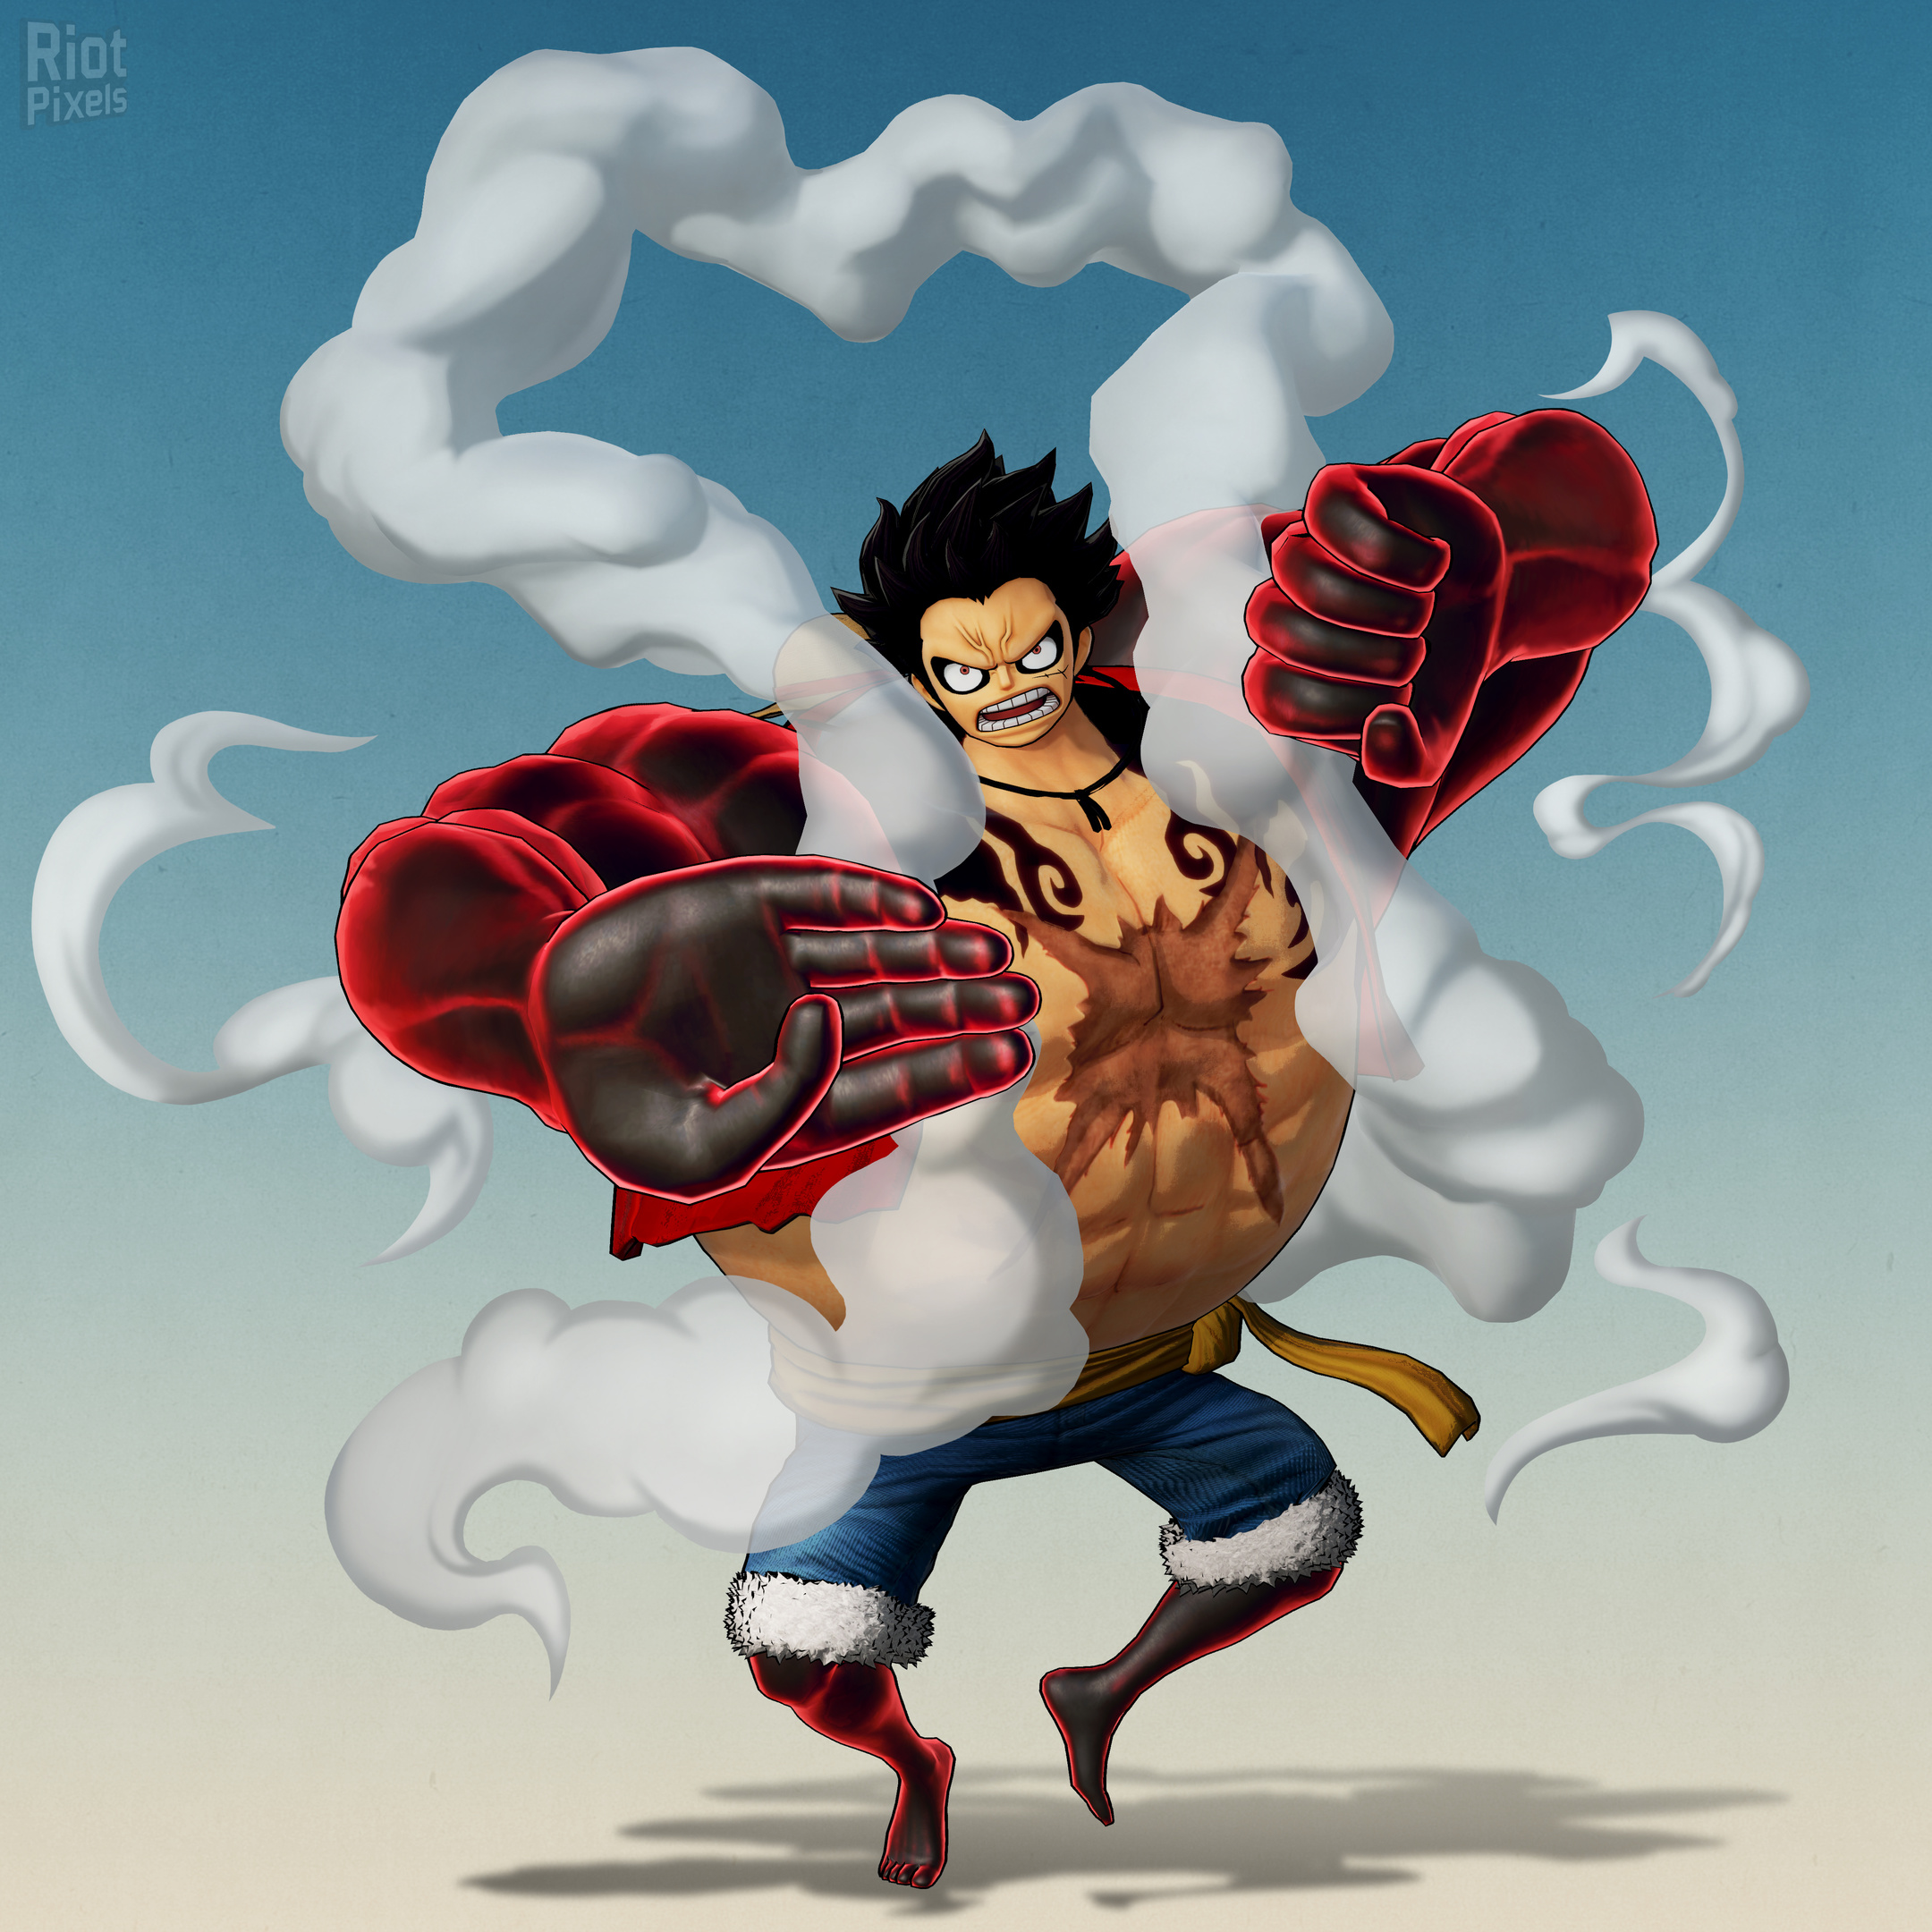 One Piece Pirate Warriors 4 Game Artworks At Riot Pixels